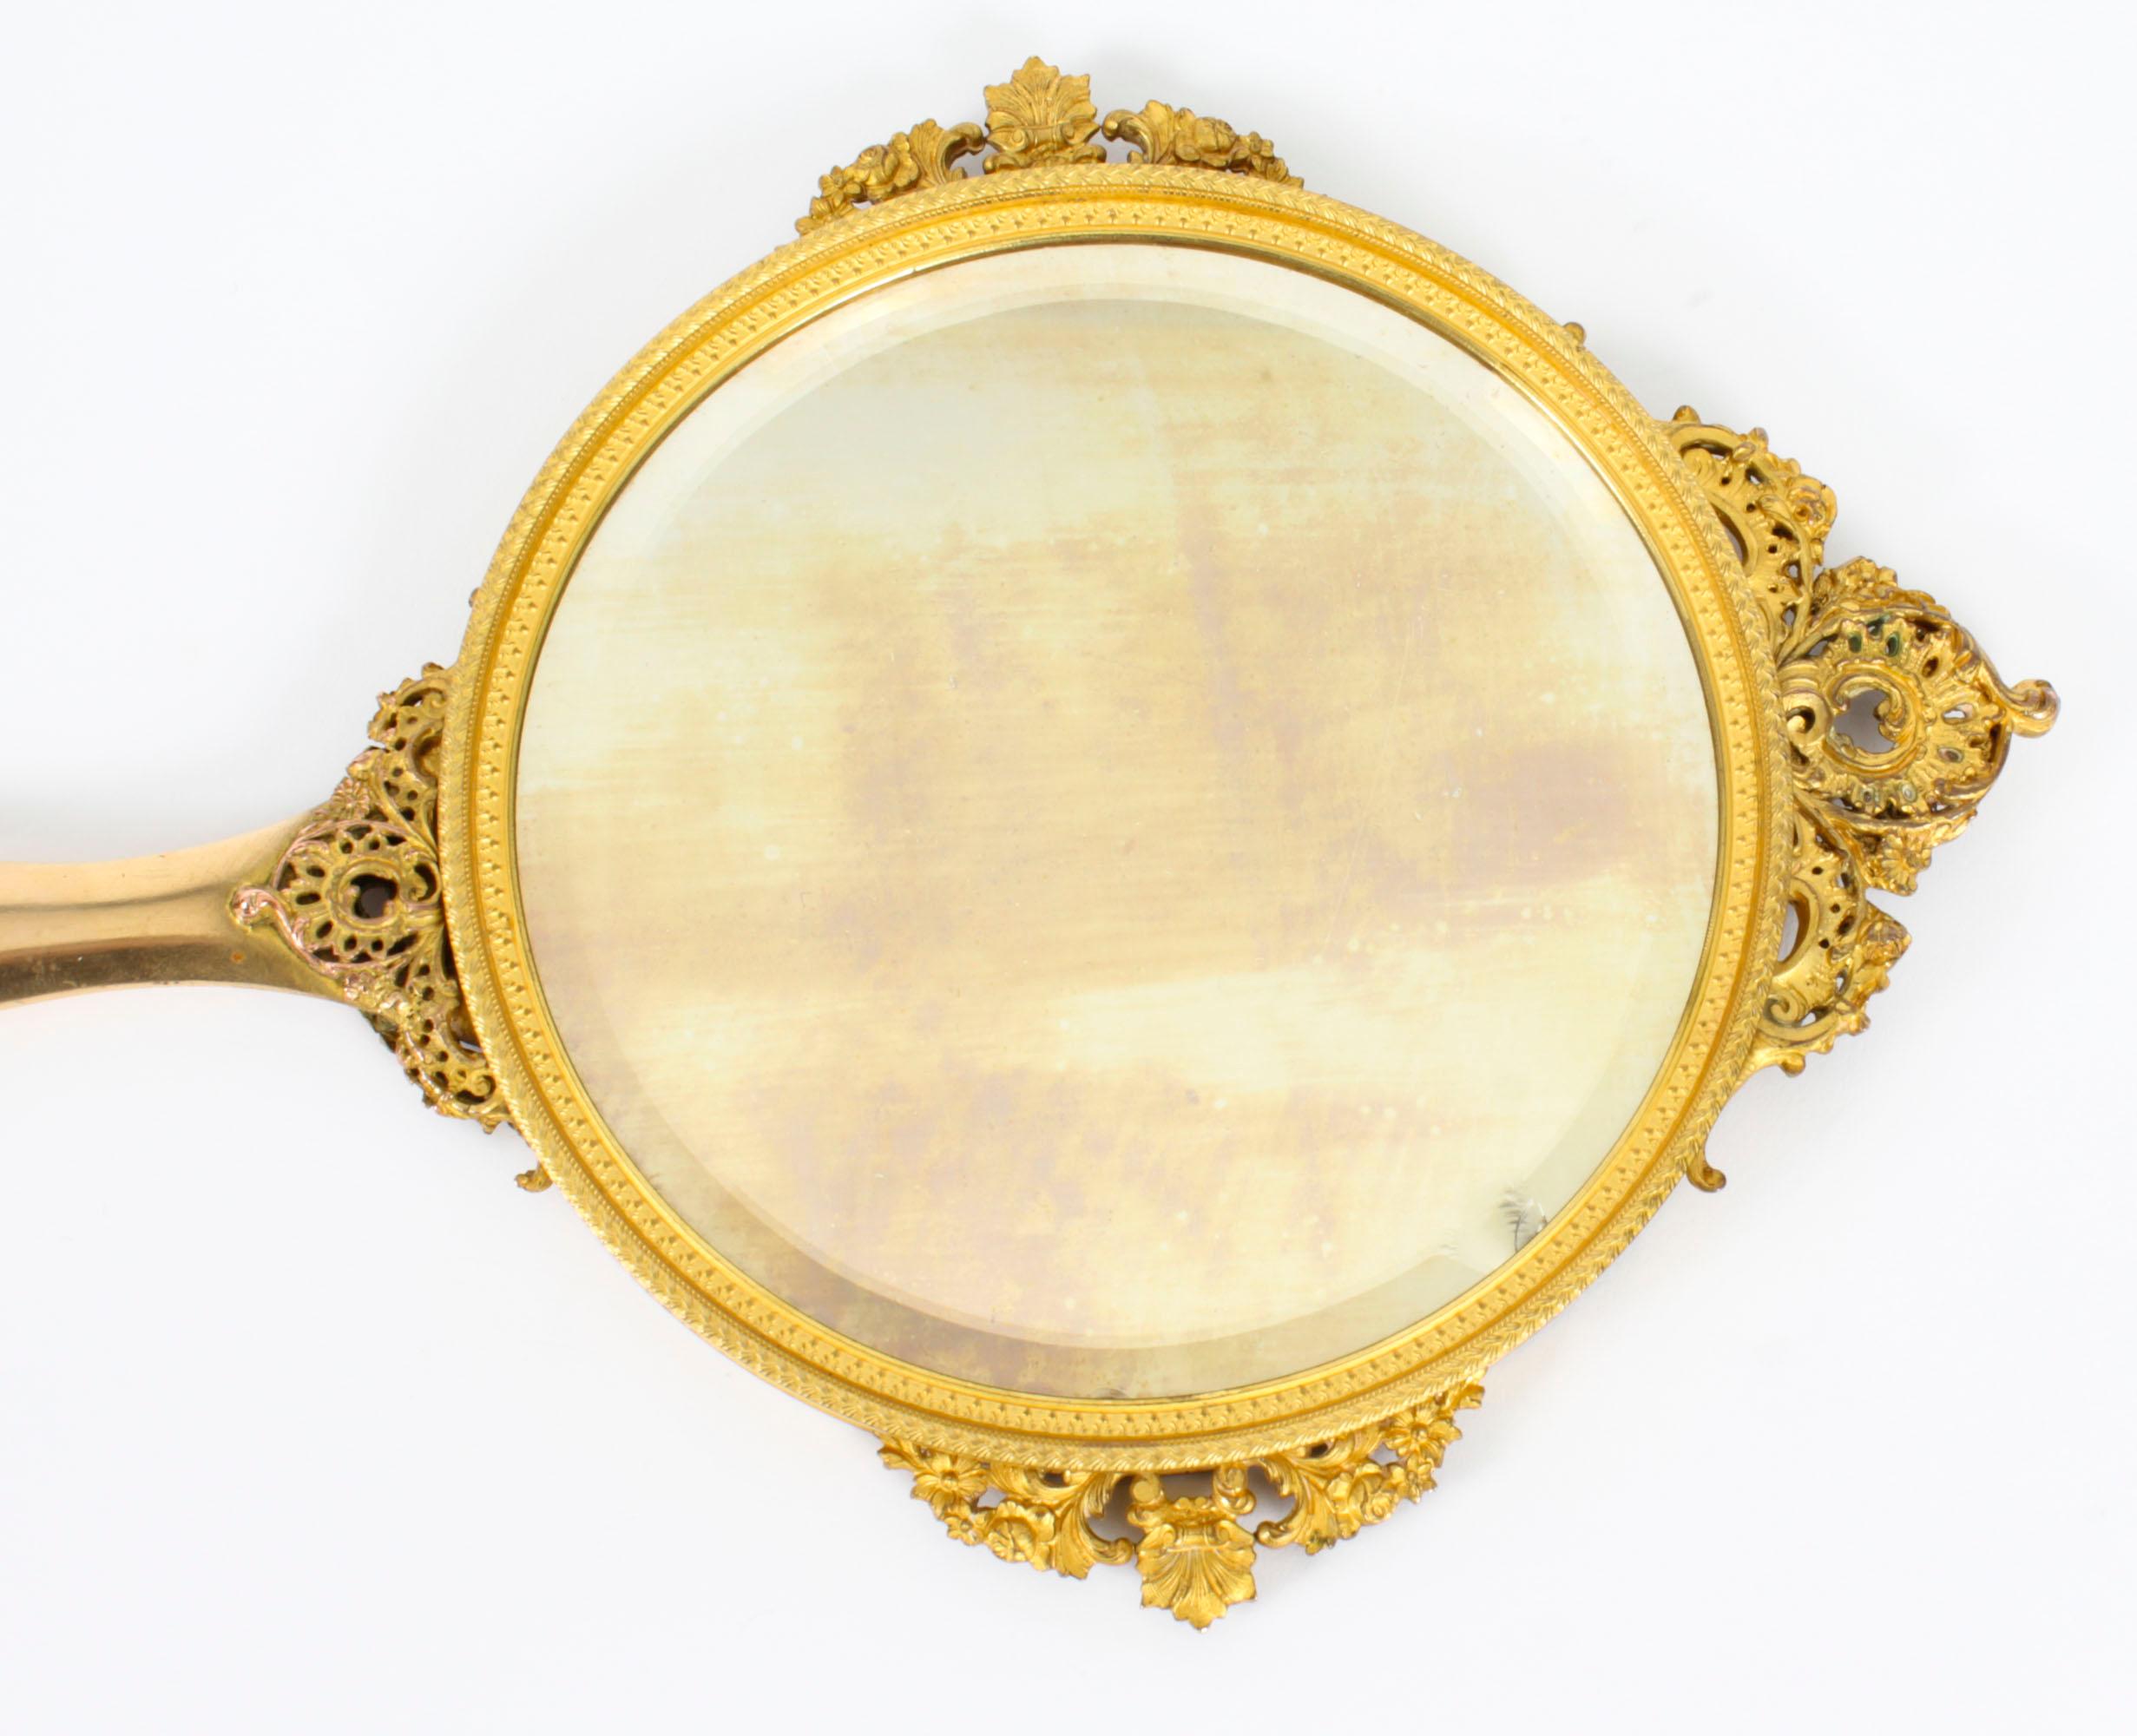 Antique French Limoges Ormolu Hand-Mirror, Signed Joseph Meissonnier 19th C For Sale 10